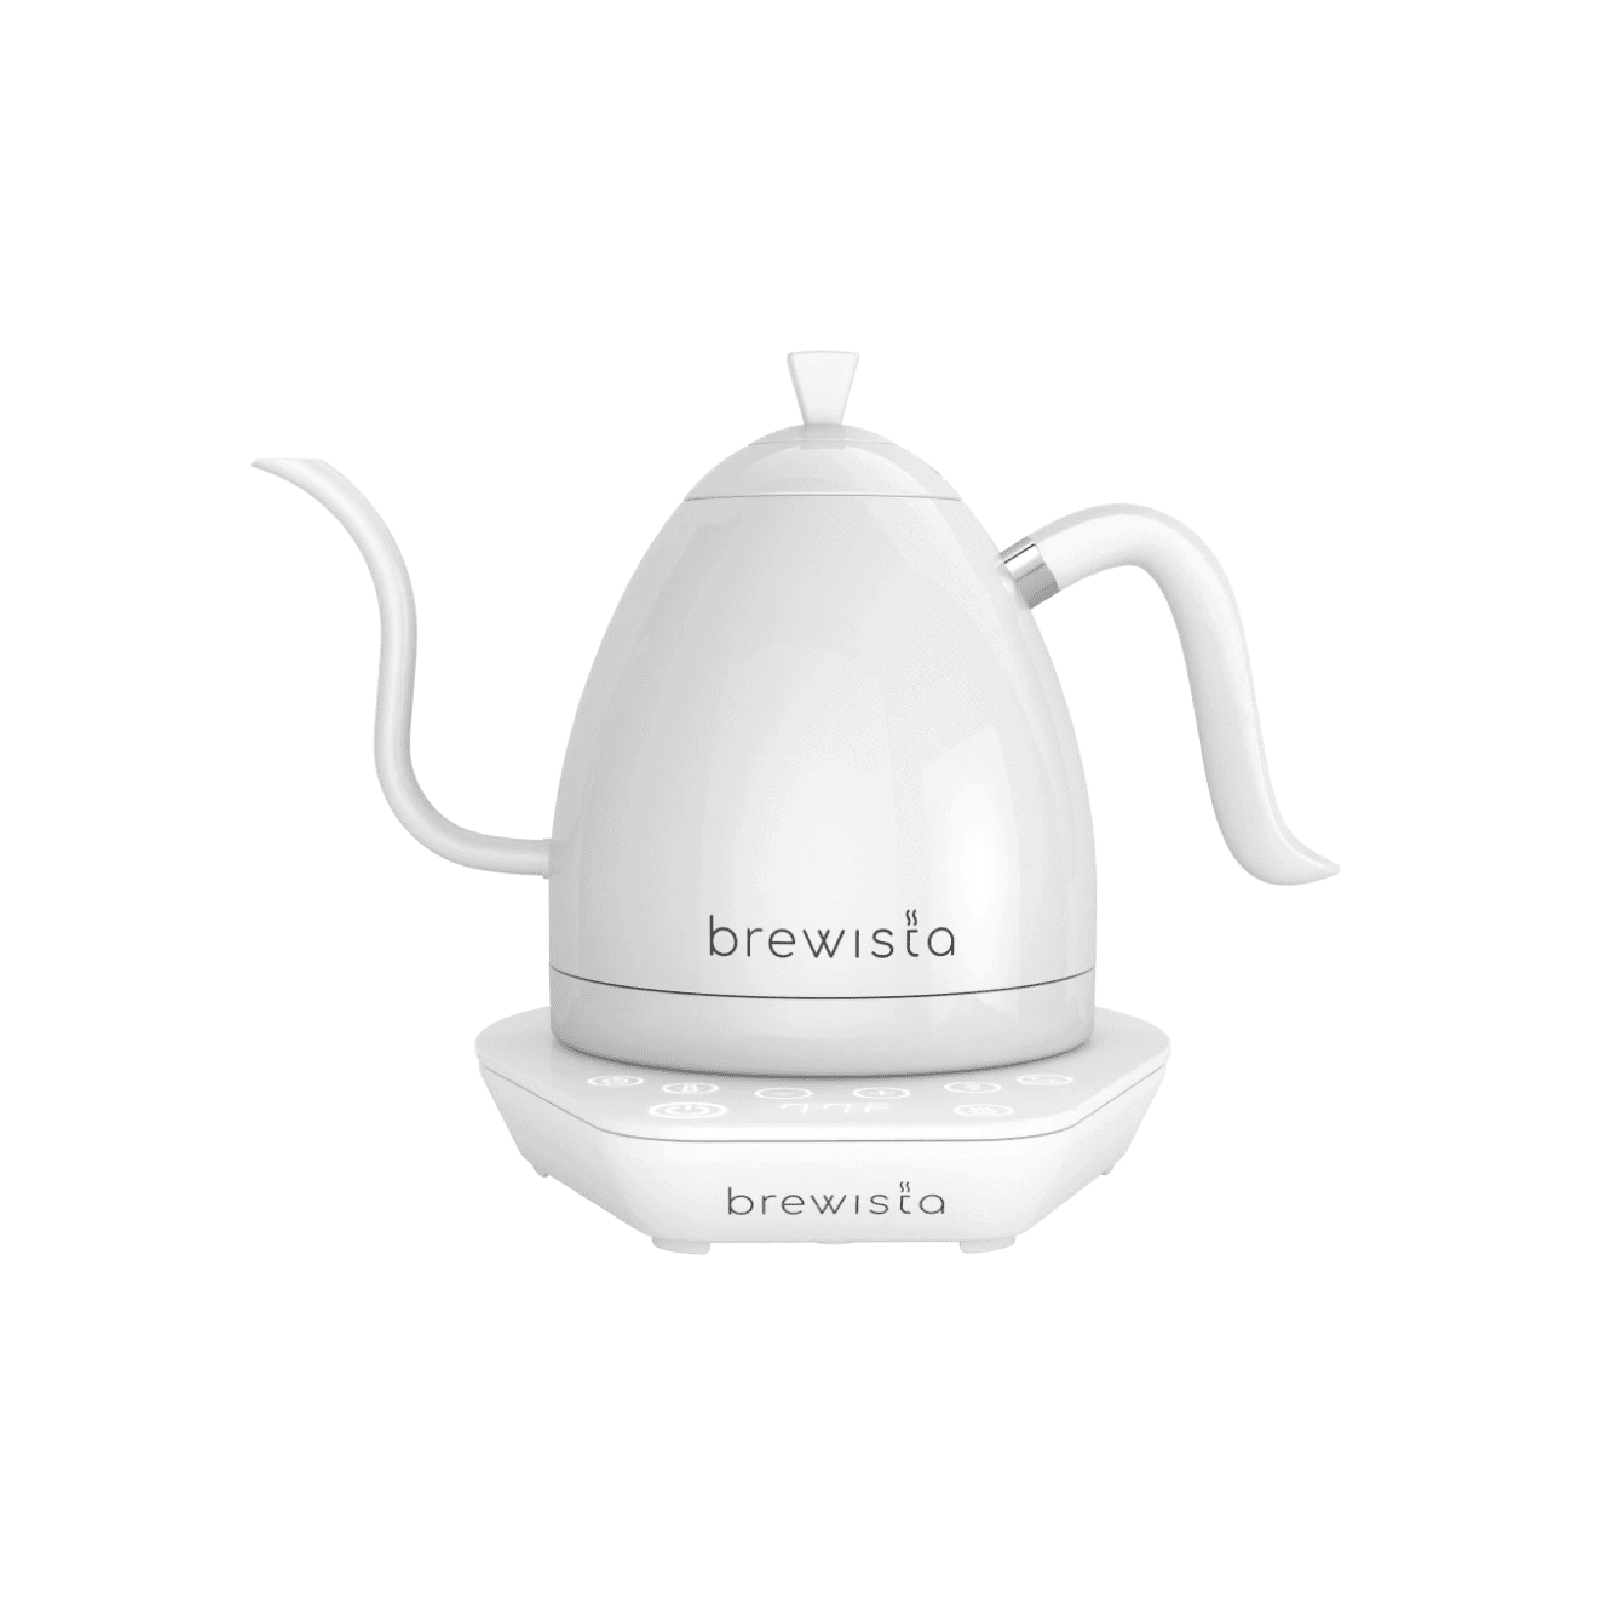 Bonavita 1.0L Stovetop Gooseneck Kettle – The Concentrated Cup